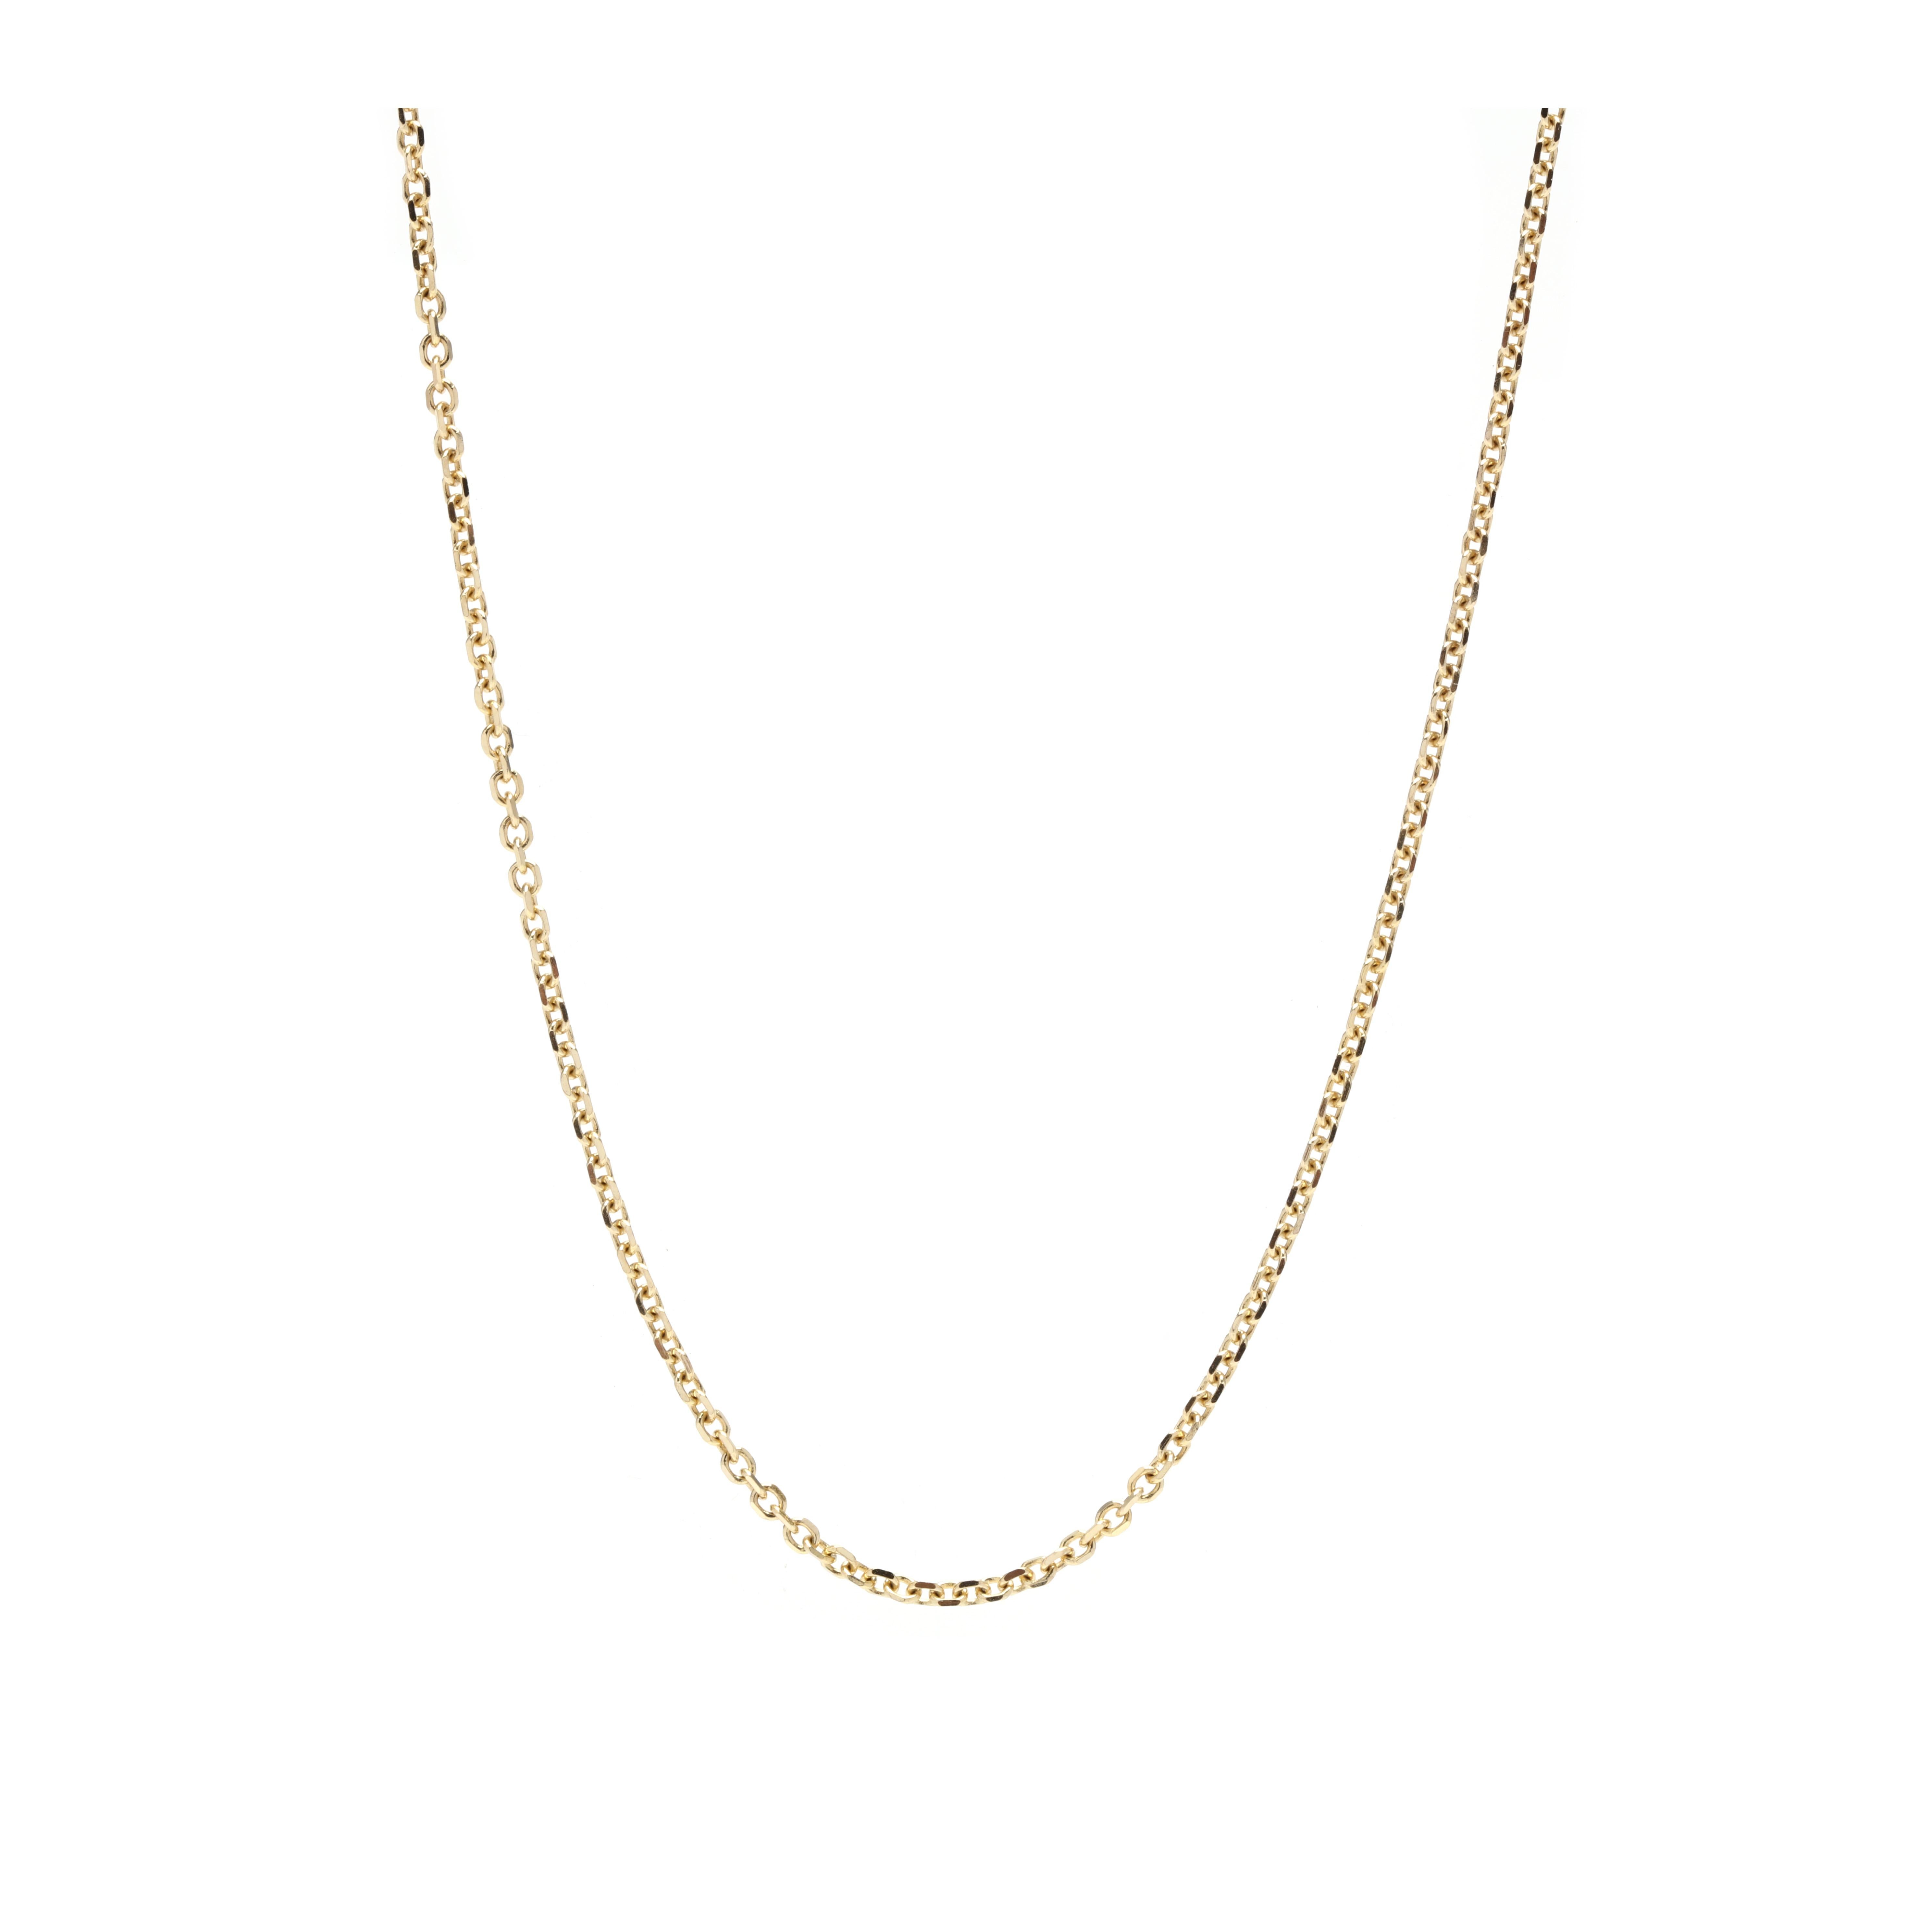 Women's or Men's Long Solid Gold Cable Chain, 14K Yellow Gold, Length 22 Inches, Long Simple